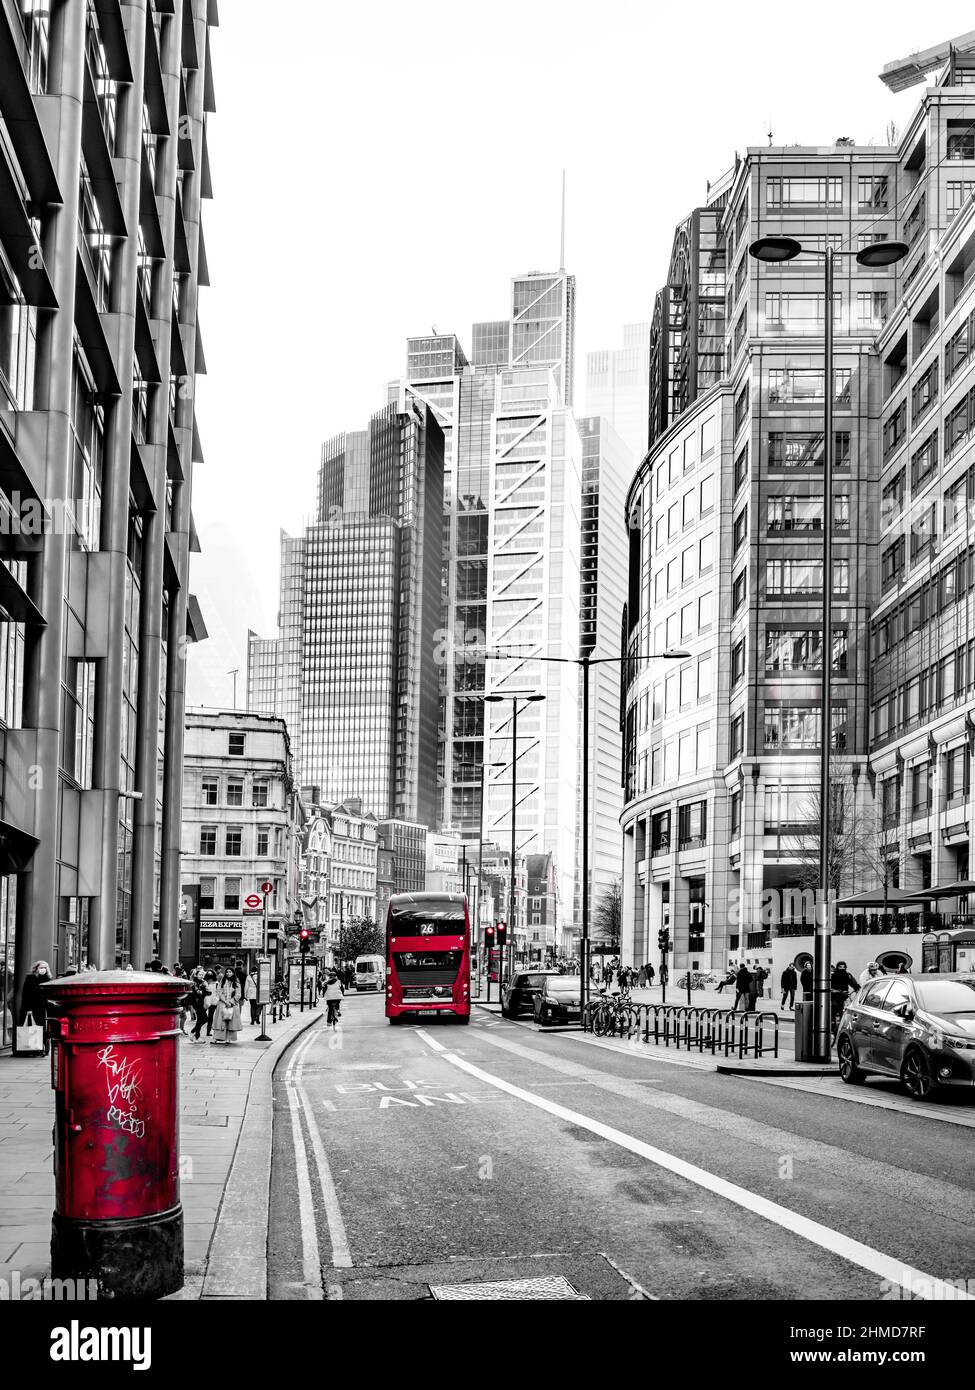 Red postbox and bus on Bishopgate. Stock Photo